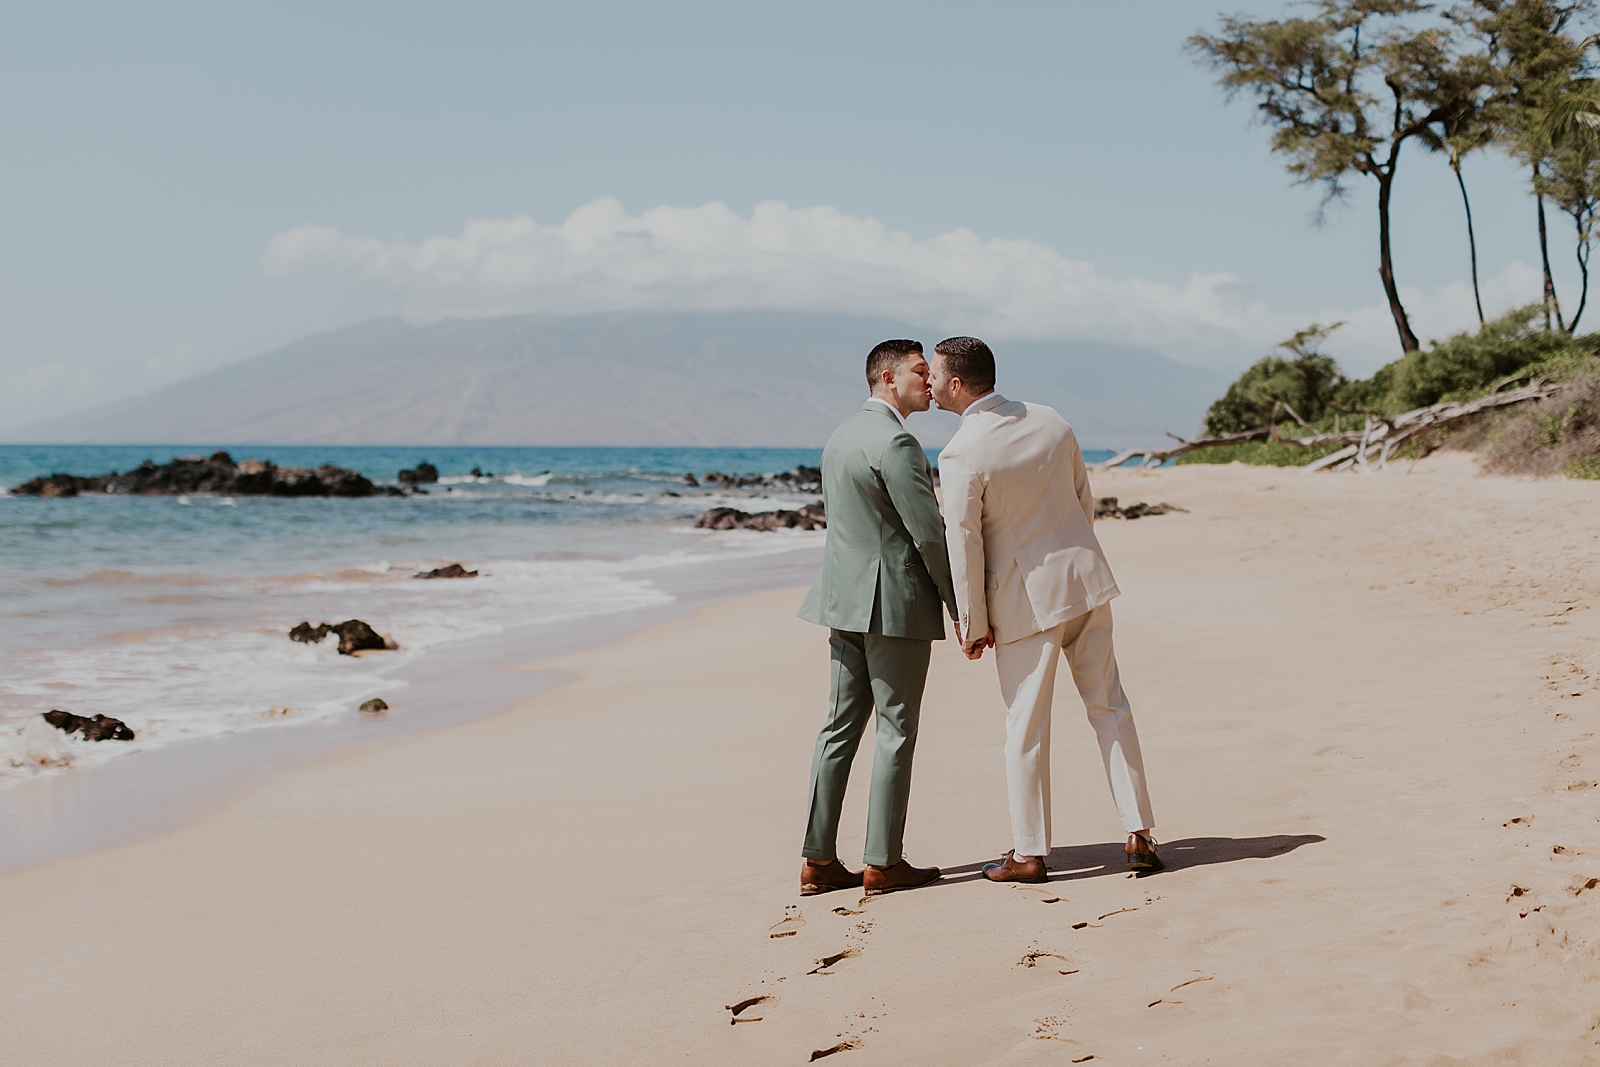 Grooms kissing while walking on the beach by the water